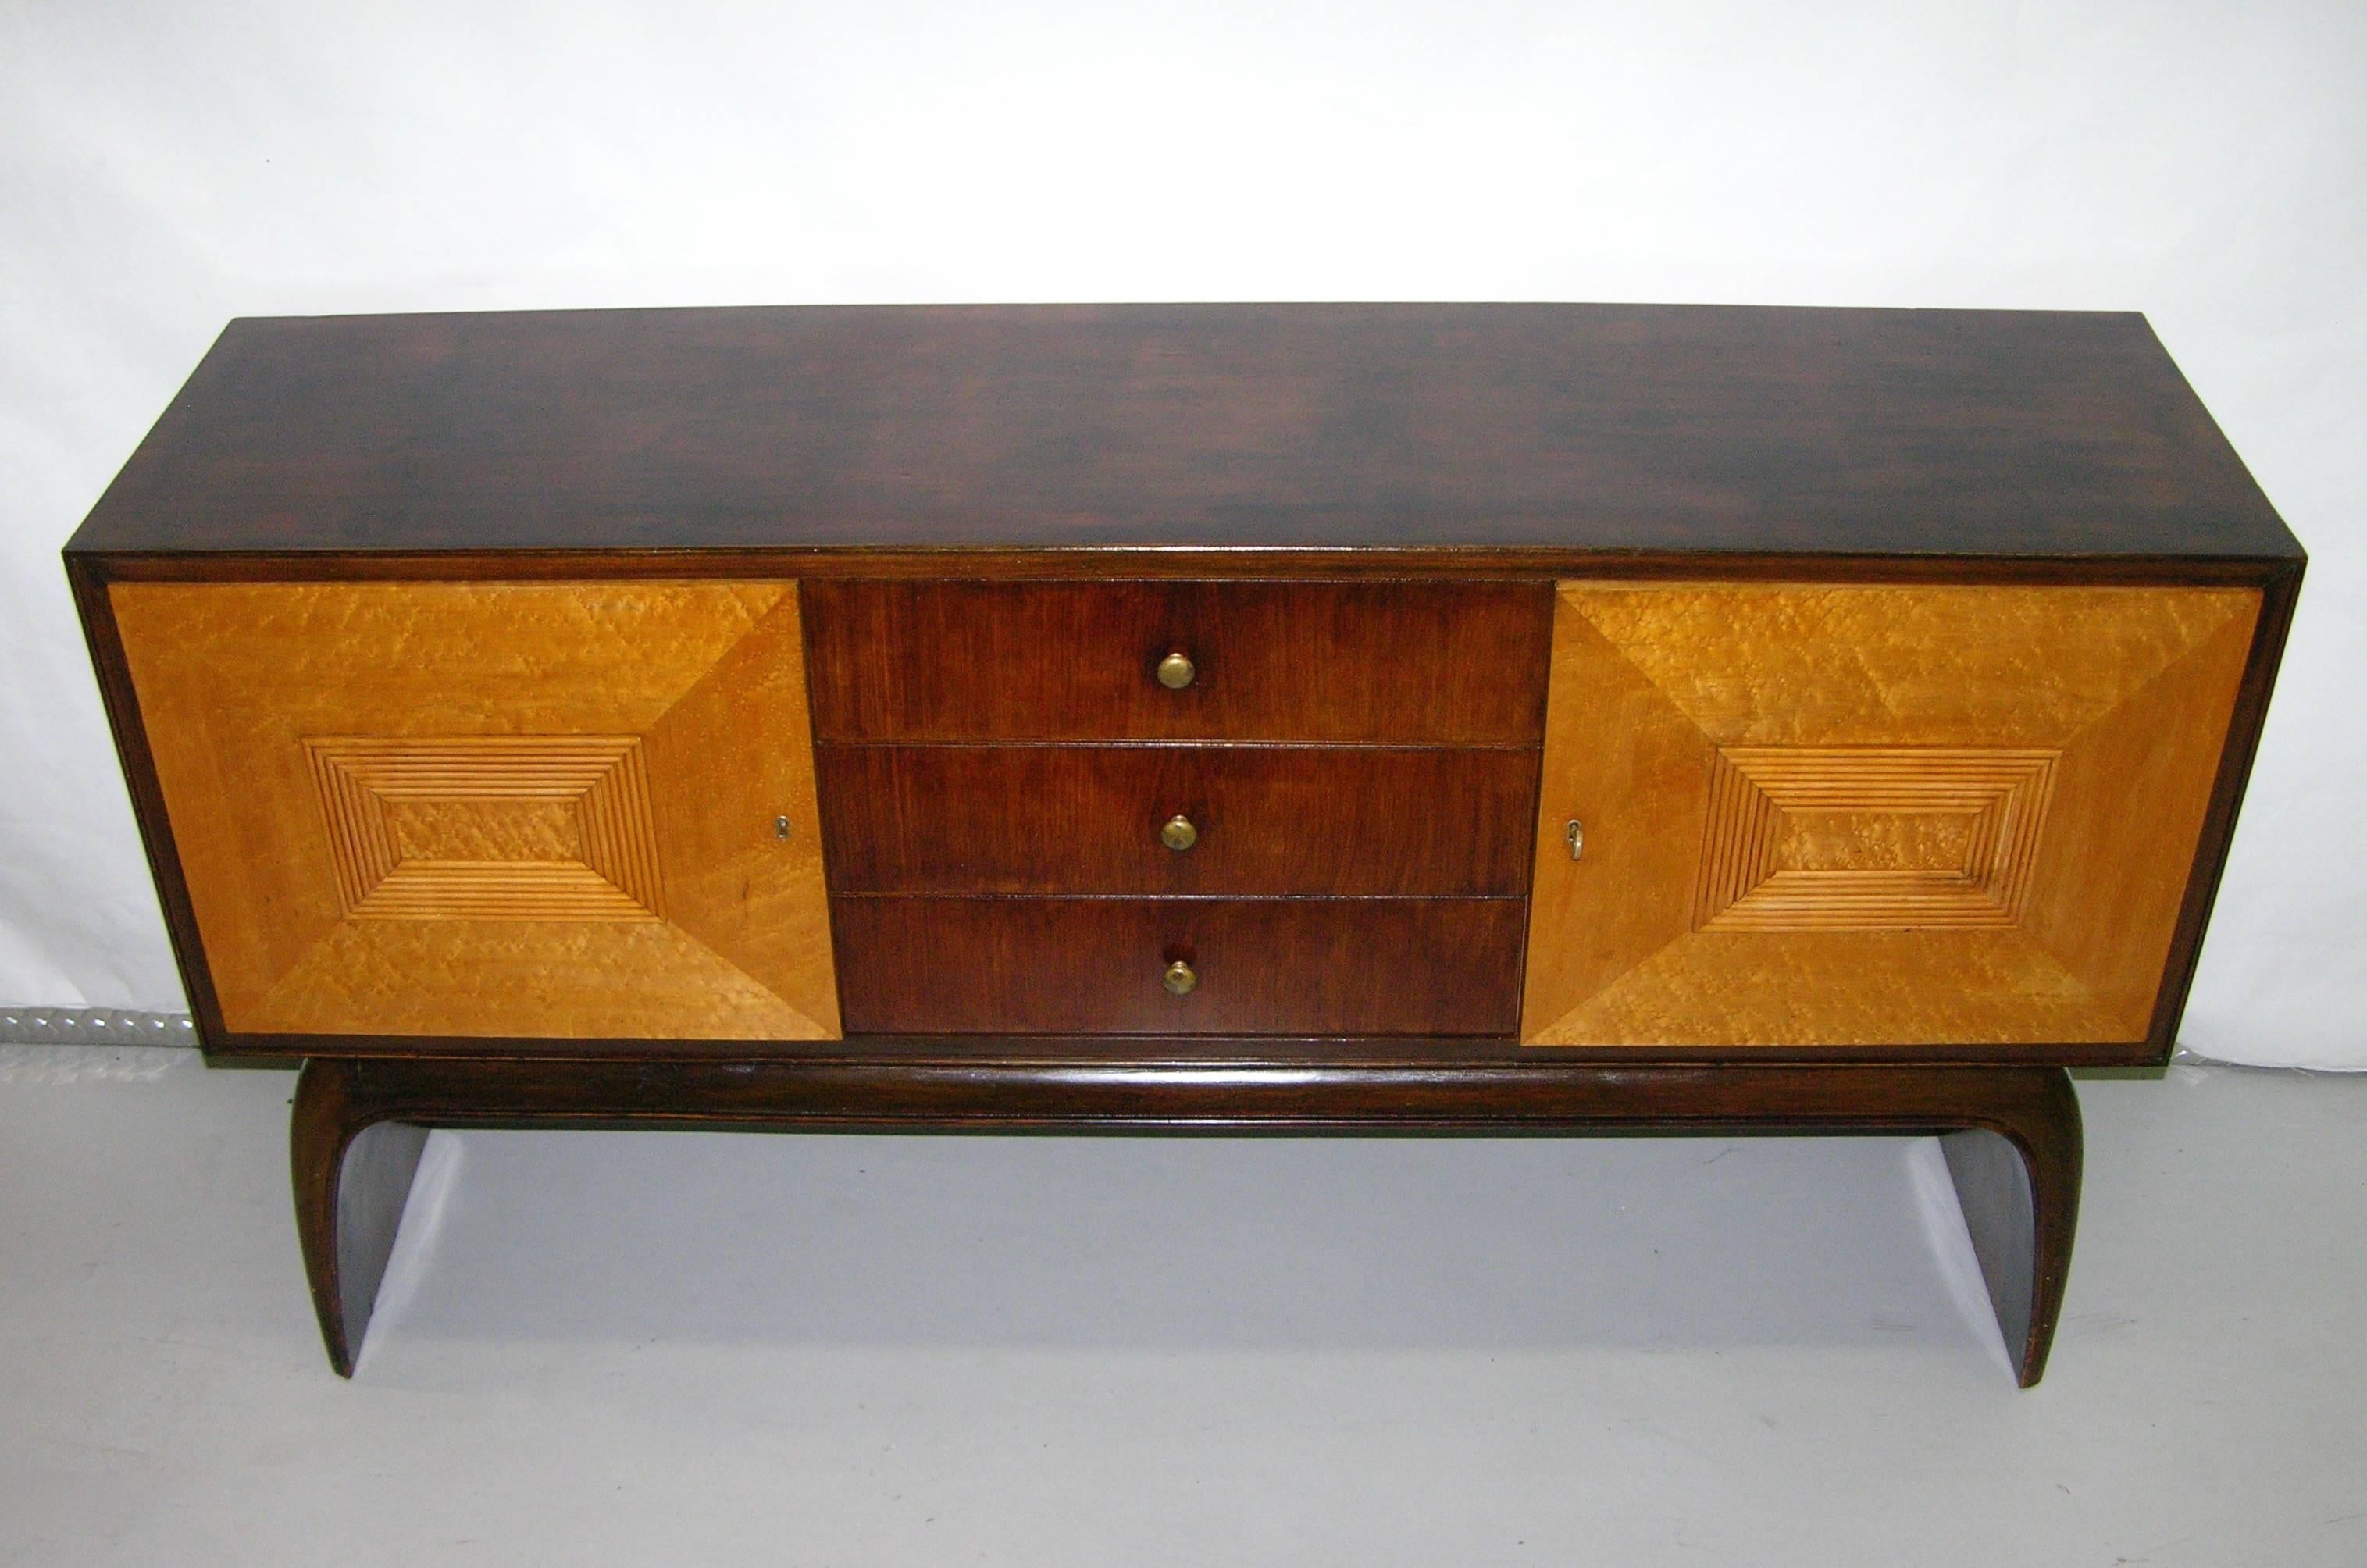 A very elegant Art Deco Italian sideboard or credenza, entirely handmade in two tones: veneered rosewood for the surround, the three central drawers and the chic waterfall base while the side doors in relief are in burl maple decorated with a raised